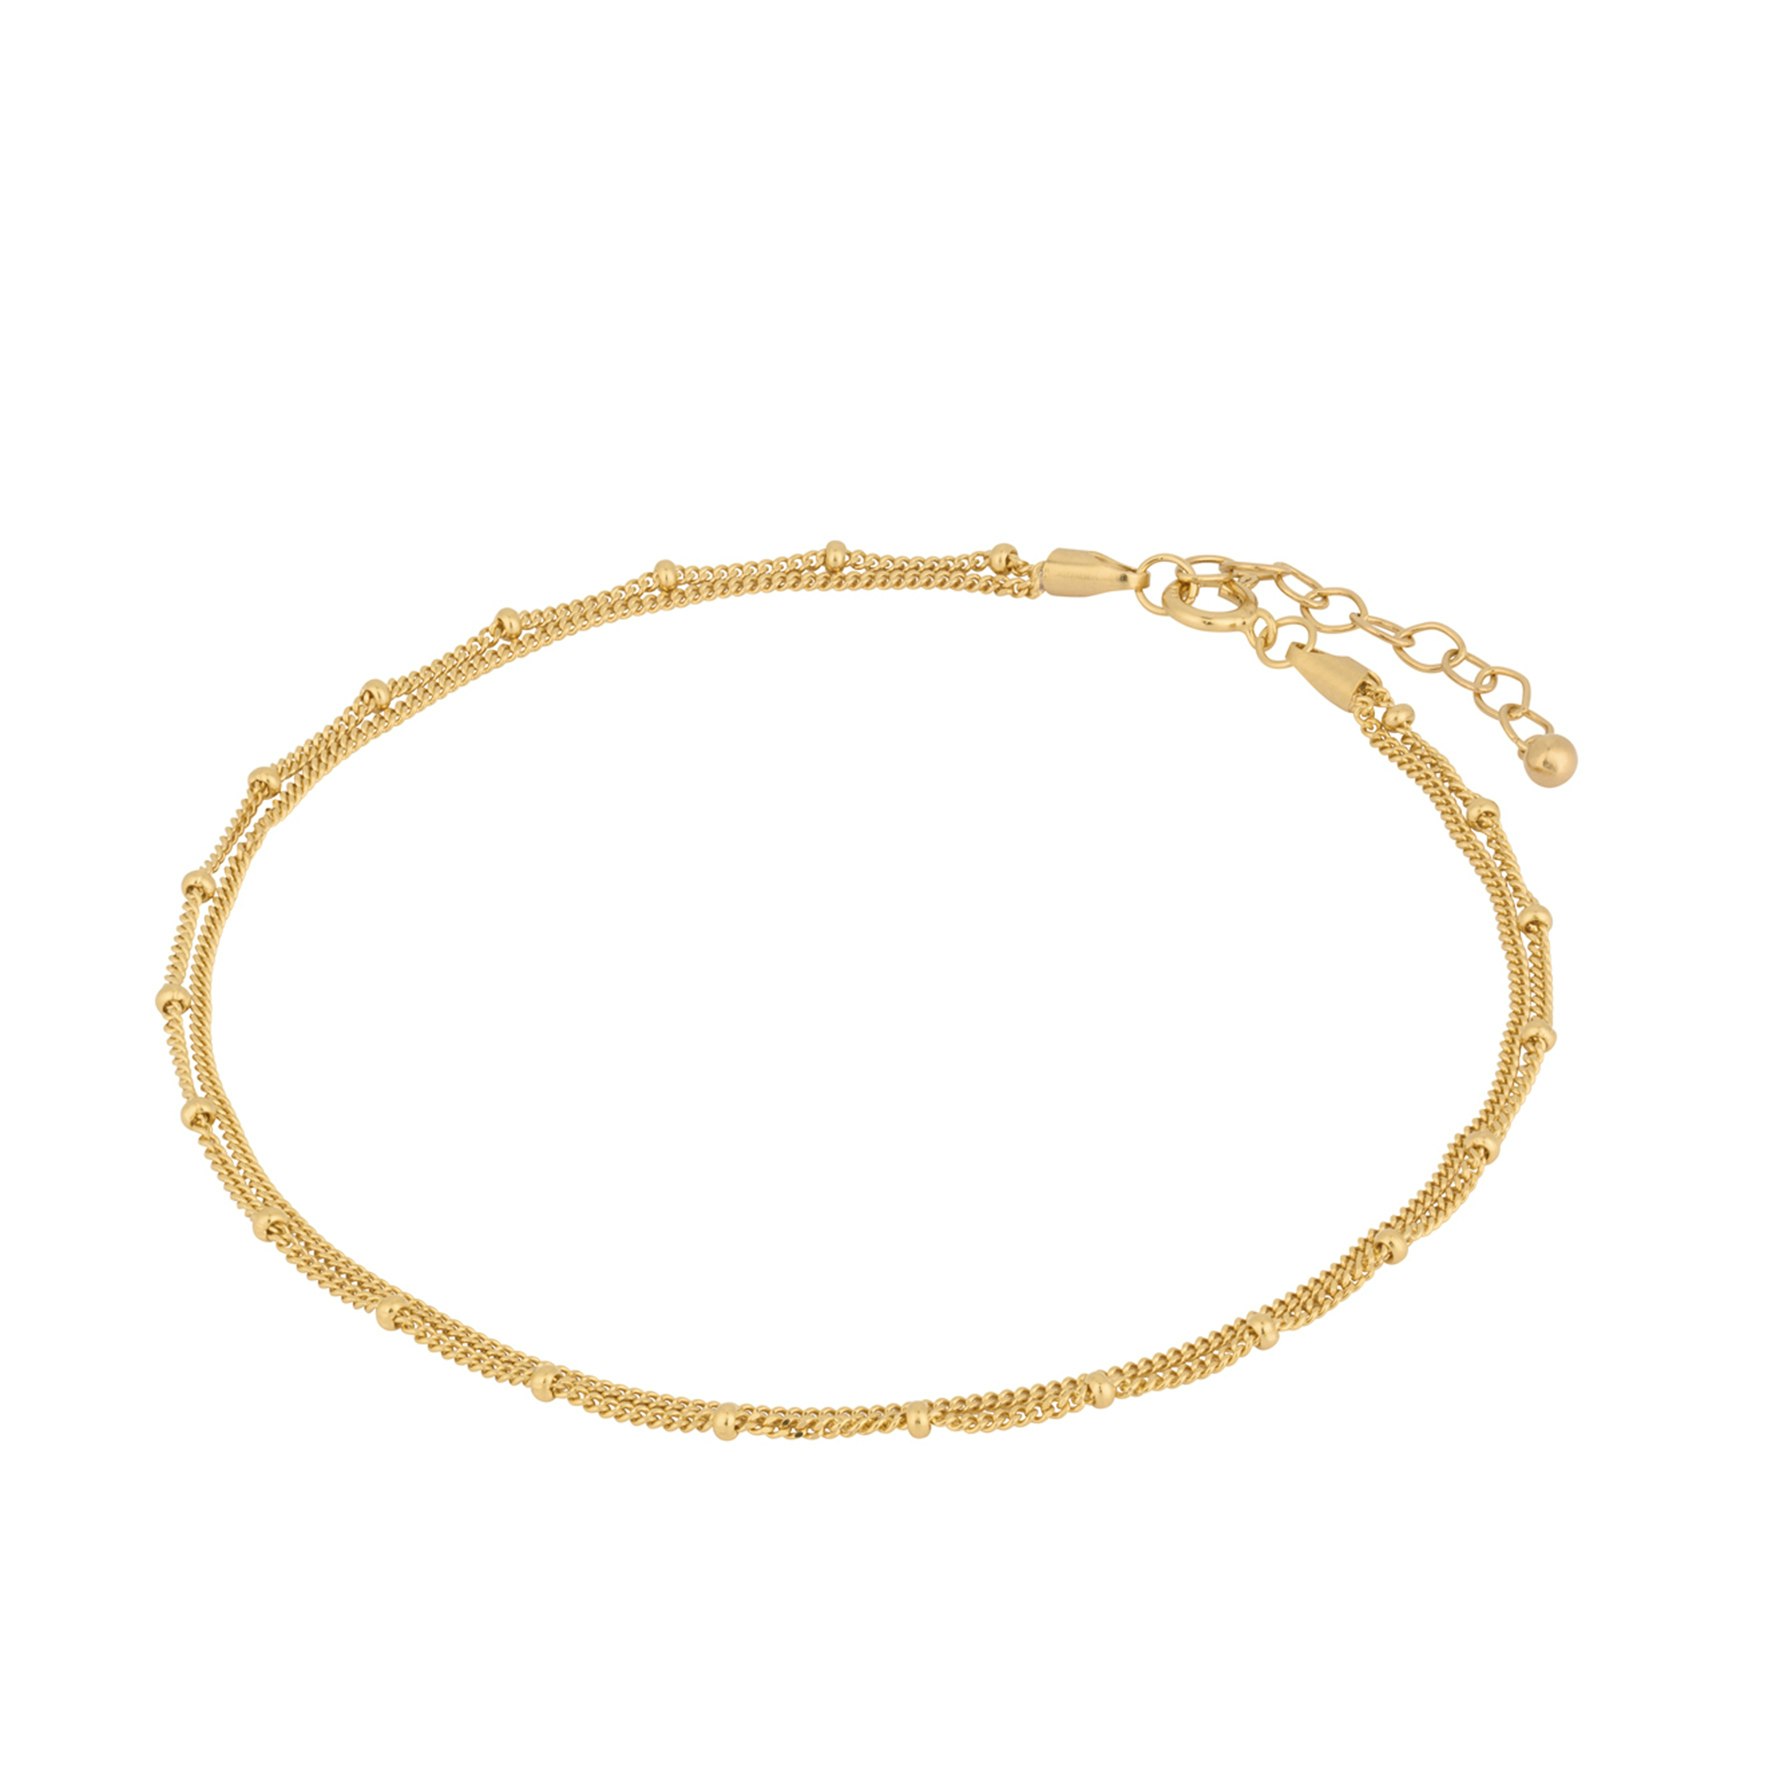 Galaxy Anklet from Pernille Corydon in Goldplated-Silver Sterling 925